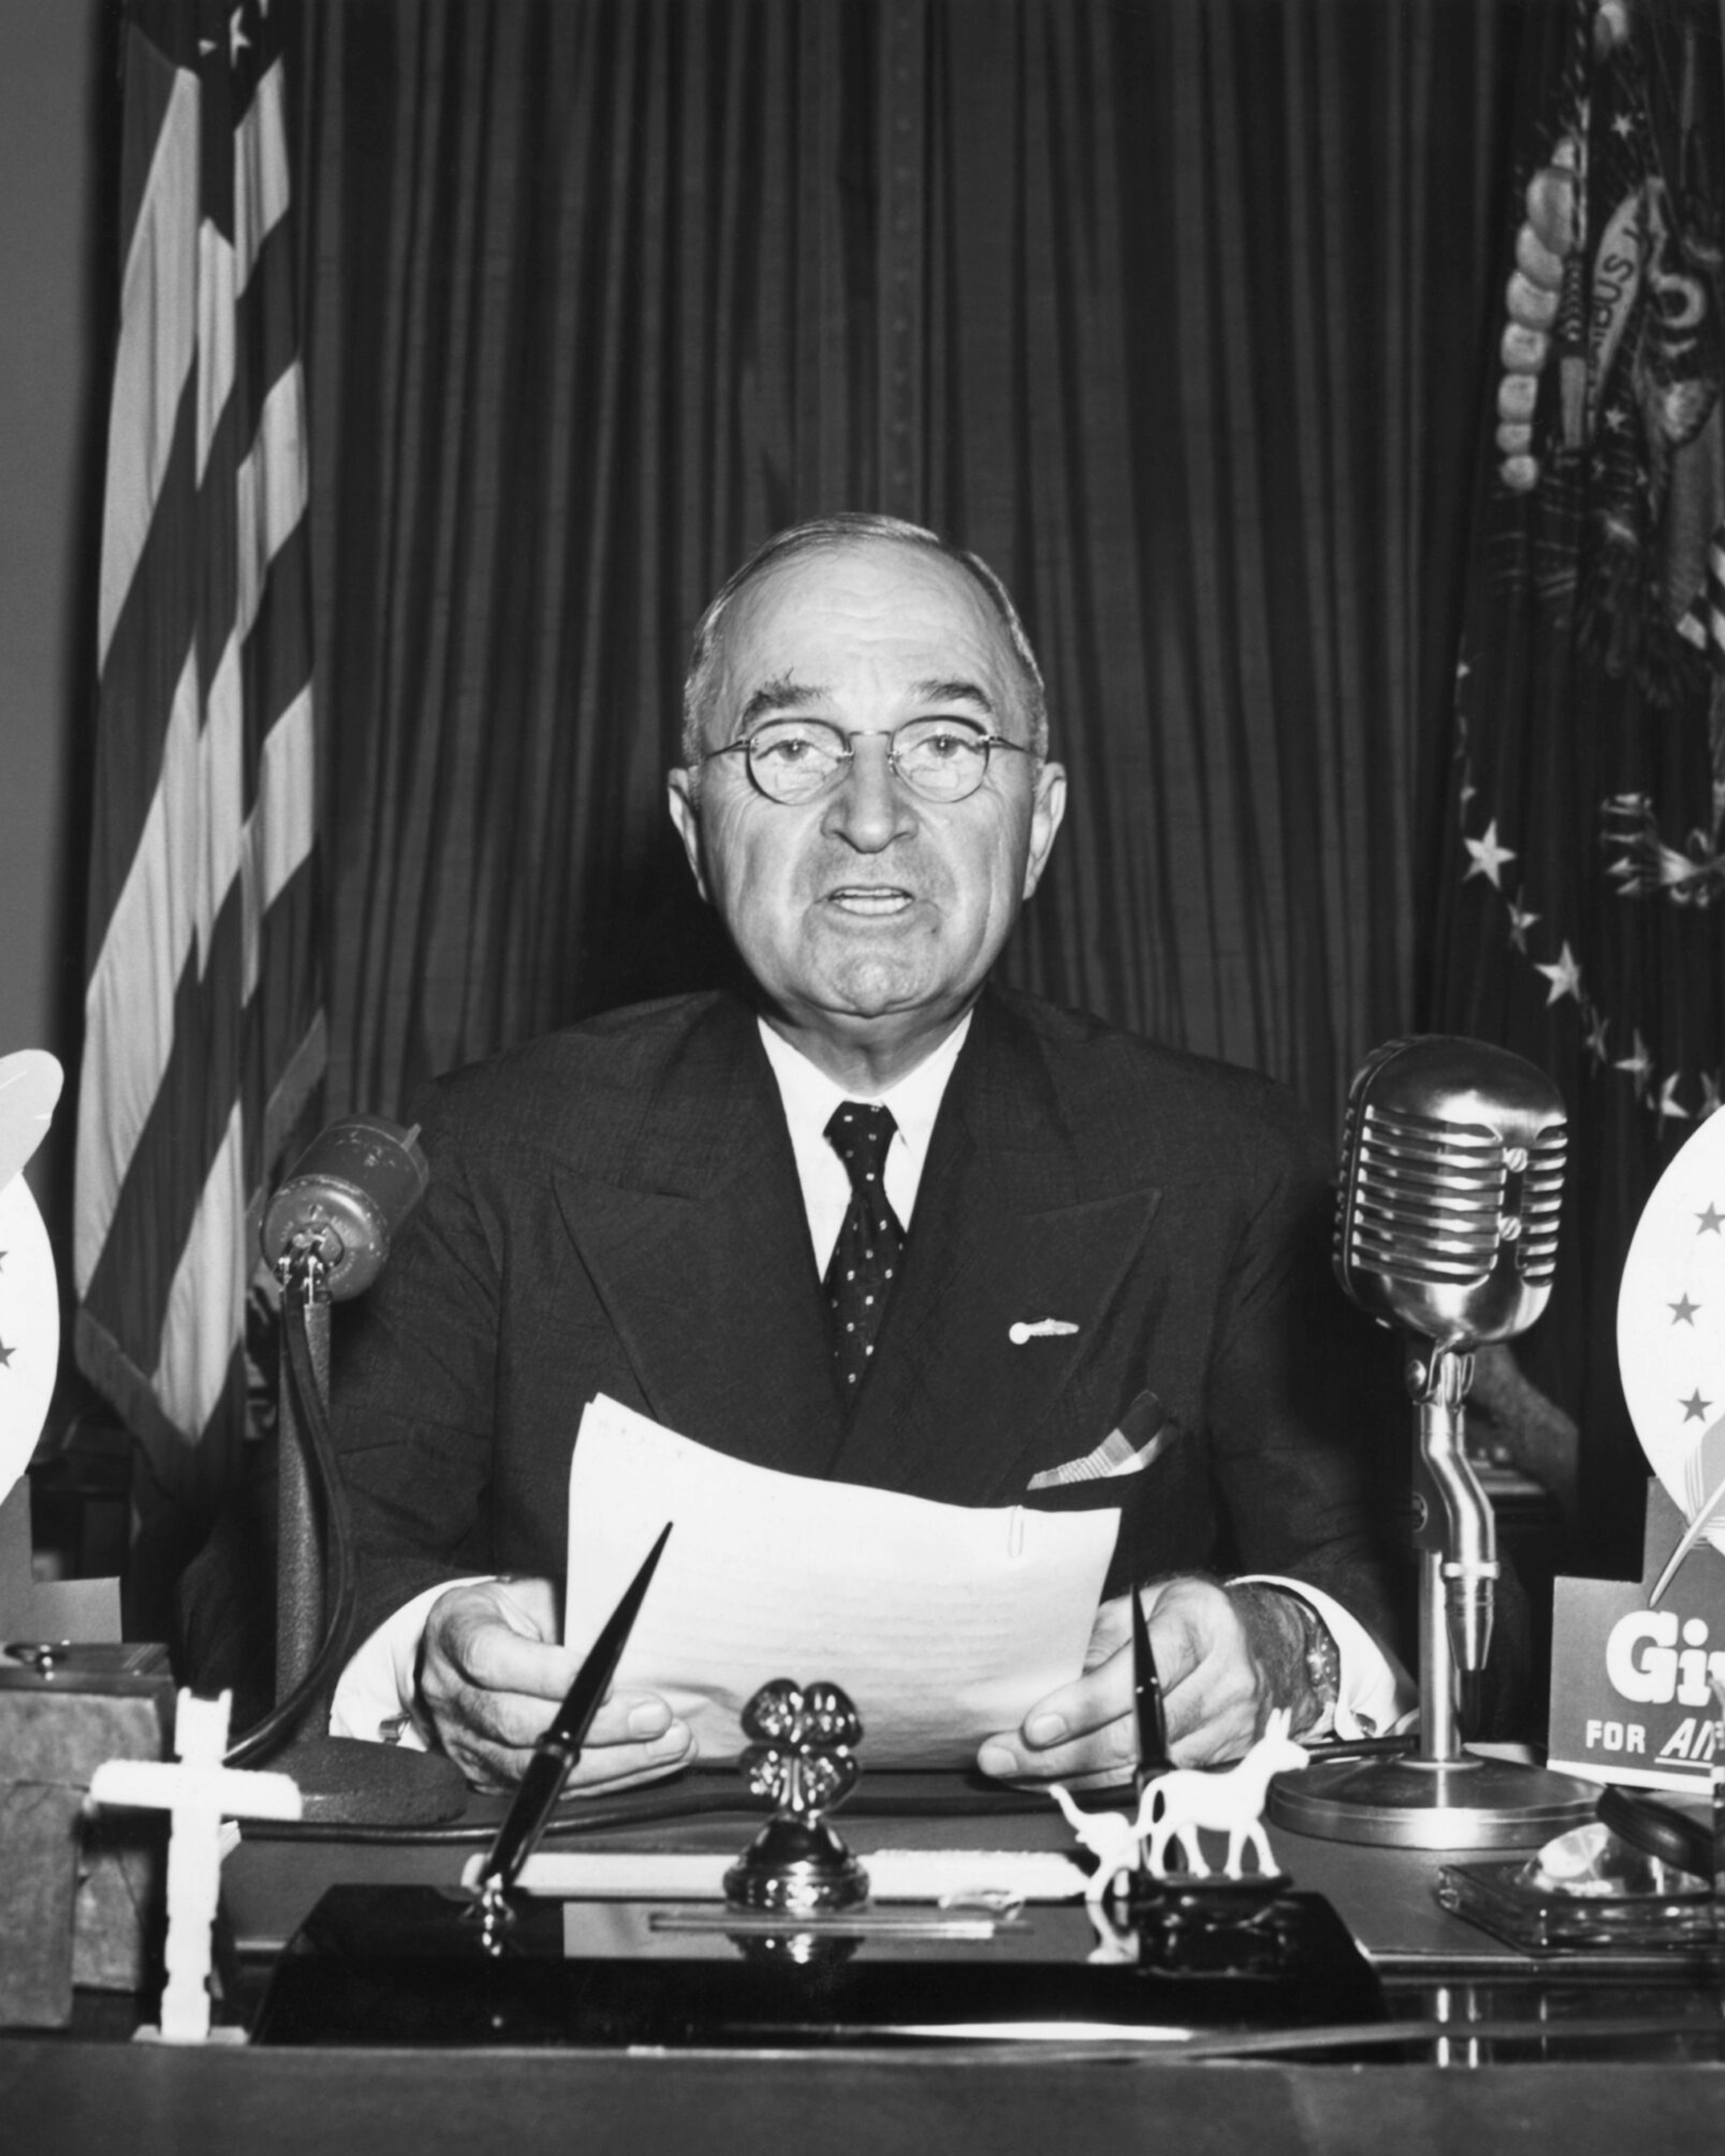 President Harry S. Truman speaks during a television address from the Oval Office.